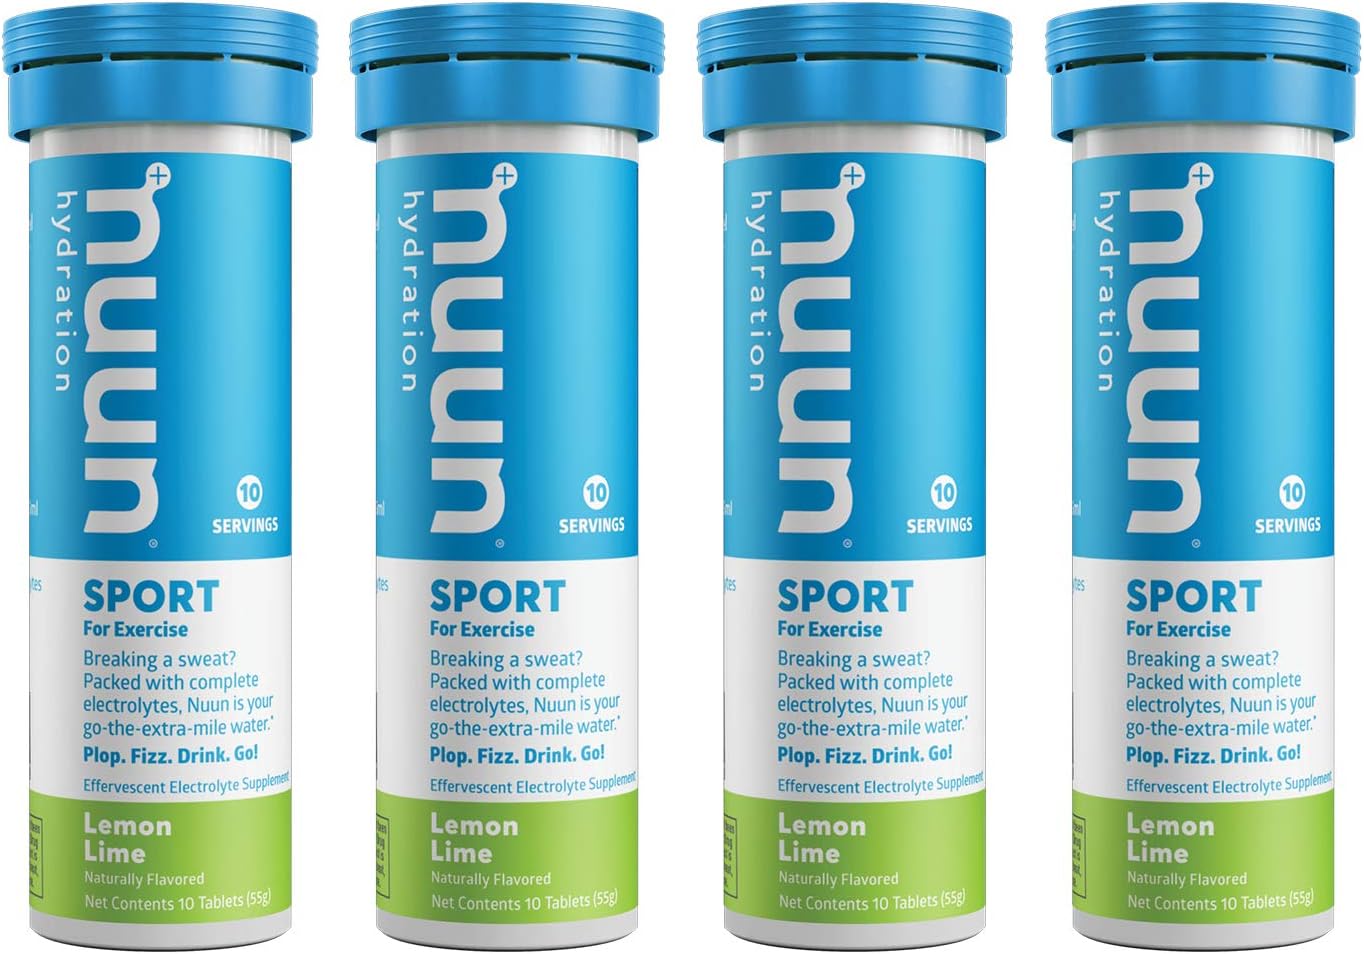 20-refreshing-facts-about-nuun-sport-hydration-tablets